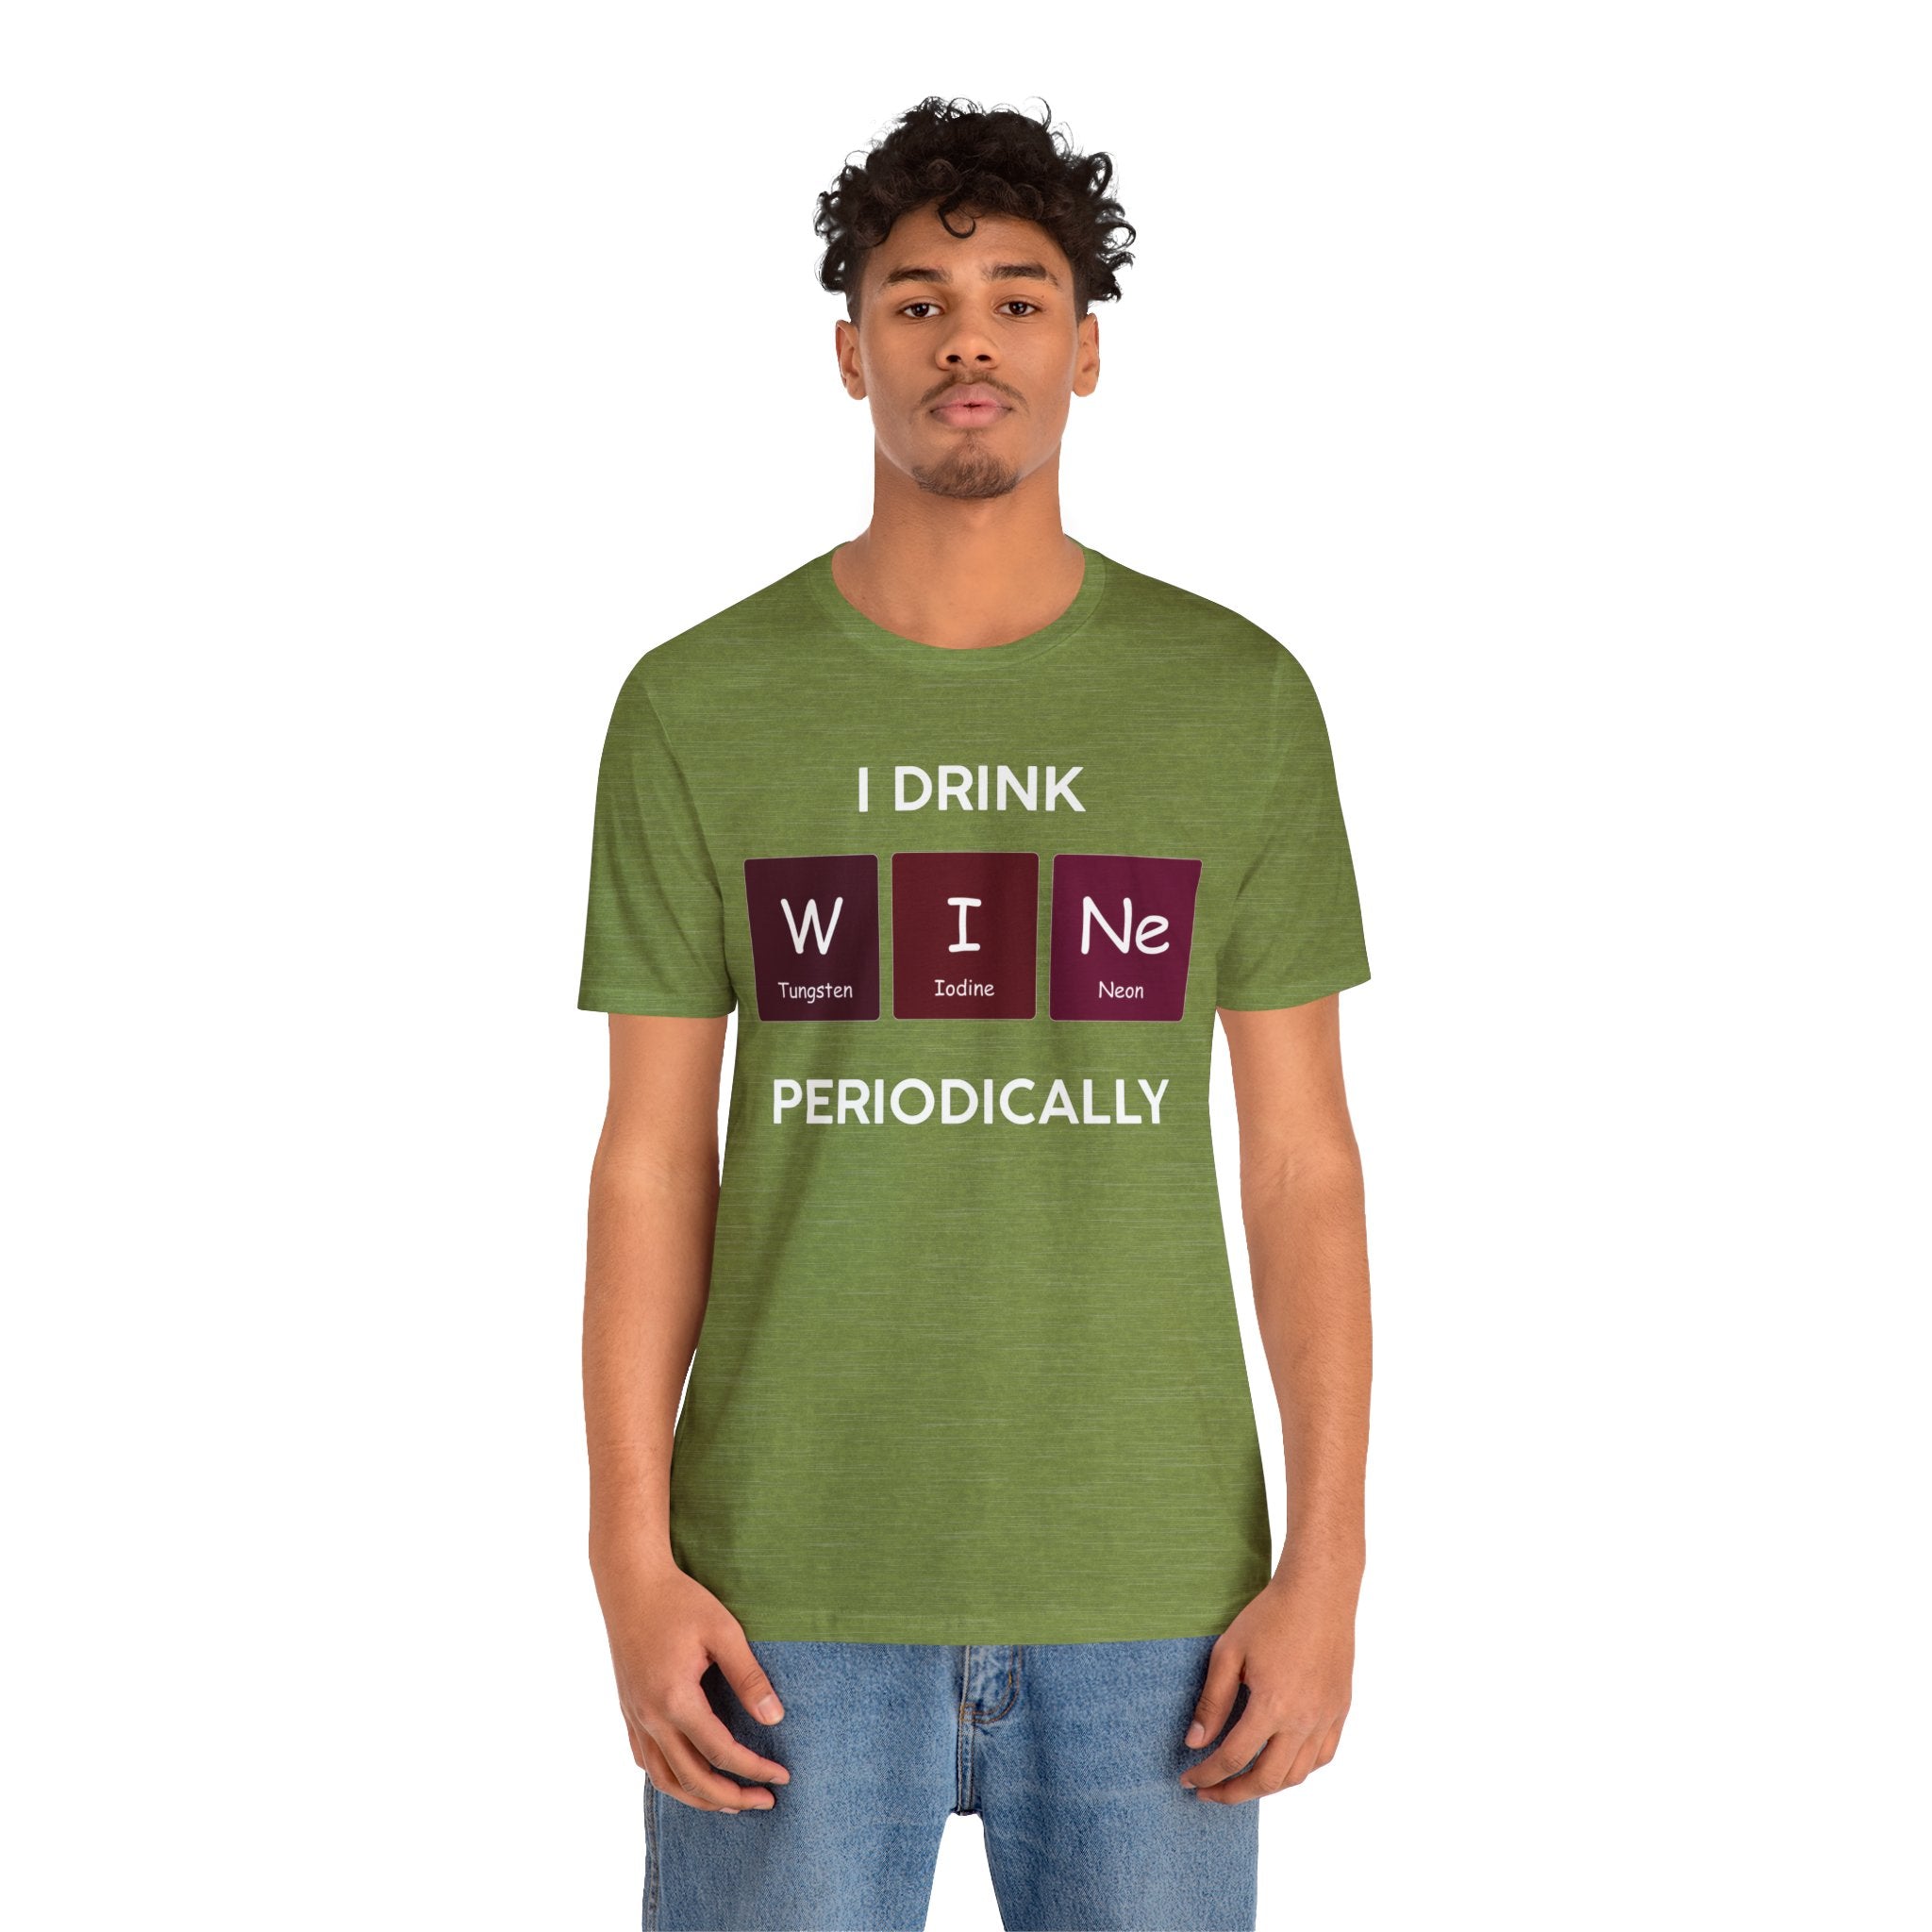 Young man in a soft cotton green t-shirt with "I Drink W-I-Ne" using periodic table elements for "wine" printed on it, paired with blue jeans, standing against a neutral background.